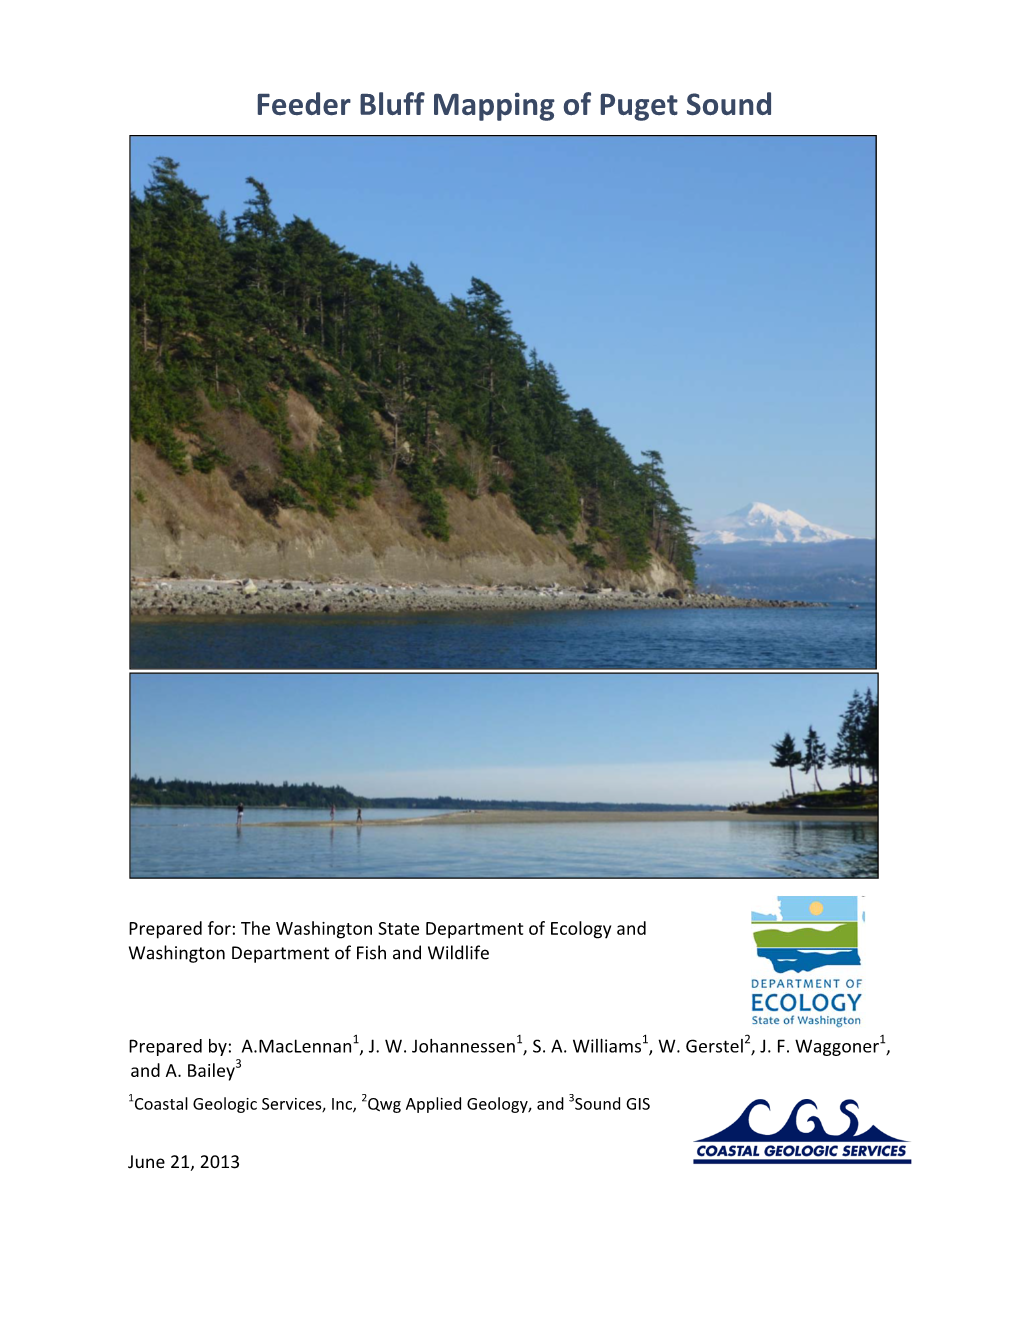 Feeder Bluff Mapping of Puget Sound, Coastal Geologic Services